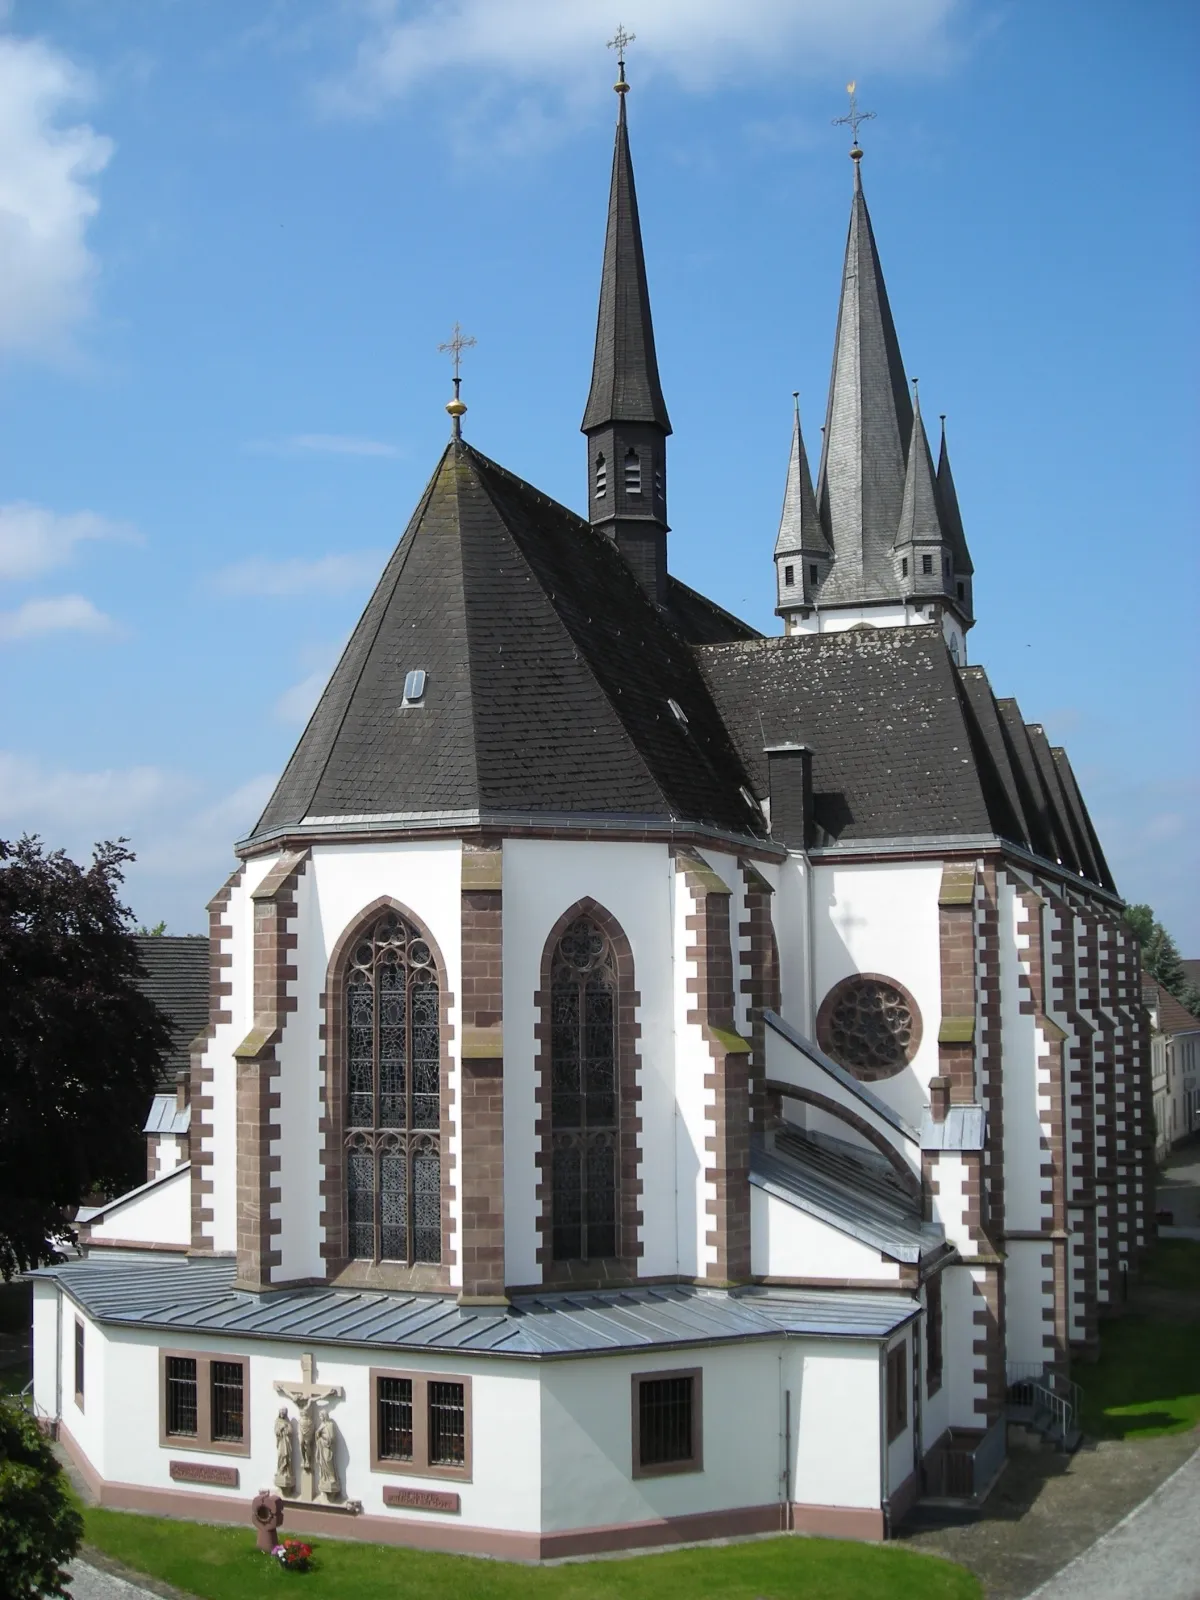 Photo showing: rear view of St. Martin Church in Bad Lippspringe, Germany